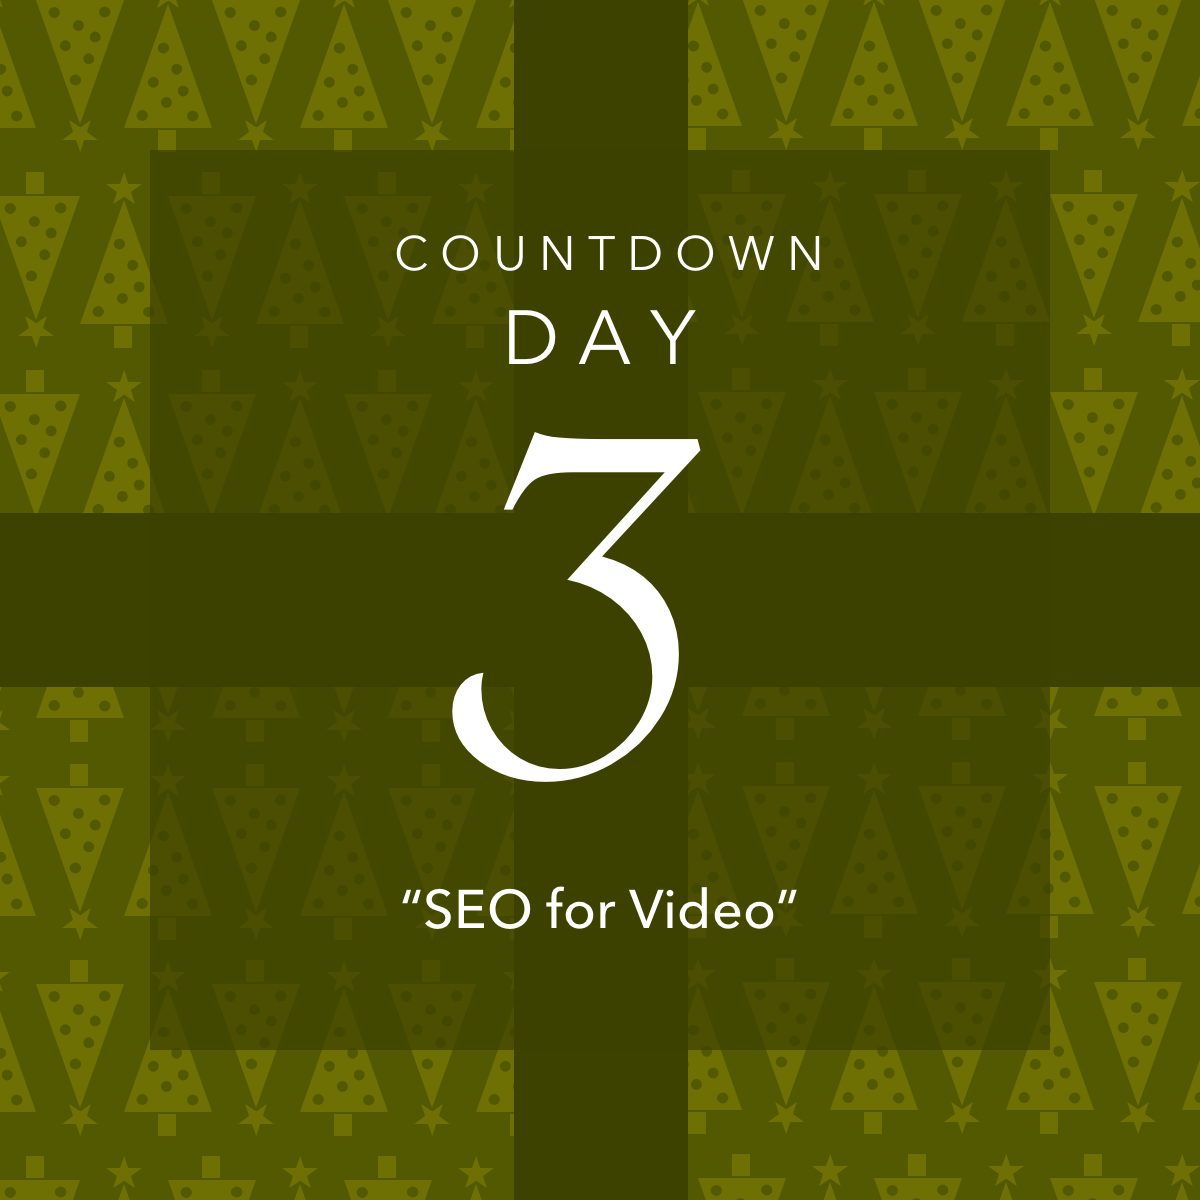 Day 3 SEO for Video 